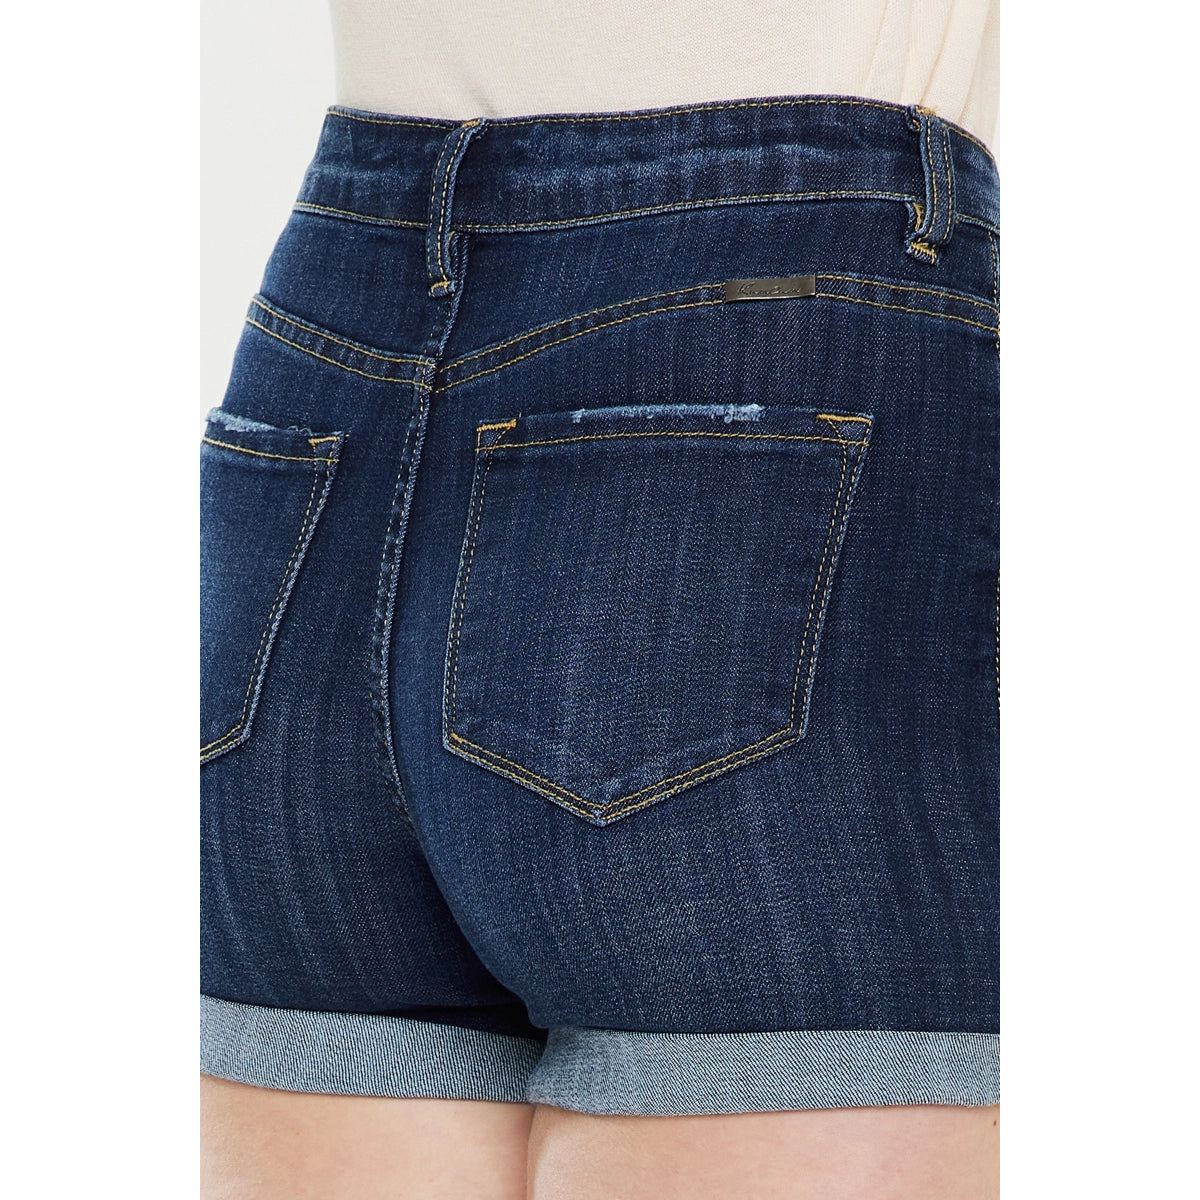 The Perfect Denim Short by KanCan! Restocked!